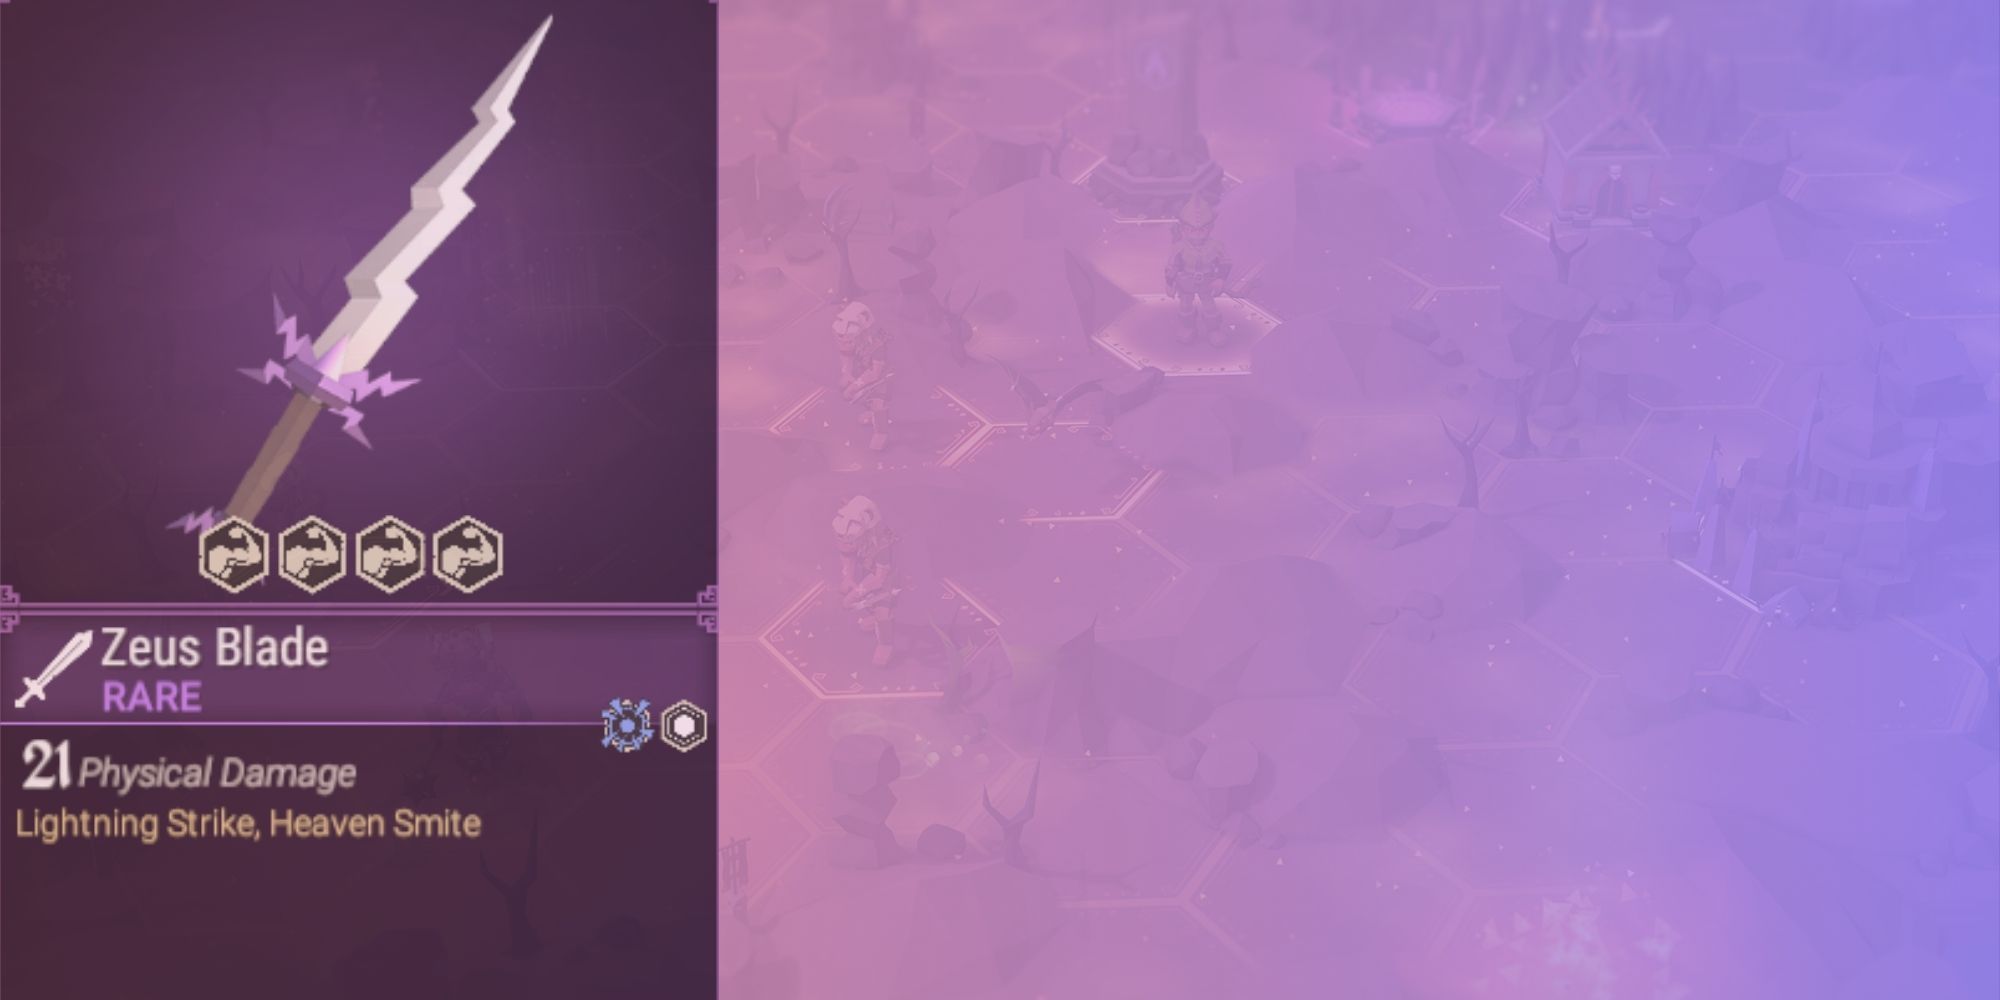 Zeus blade stats over a pink and purple gradient background